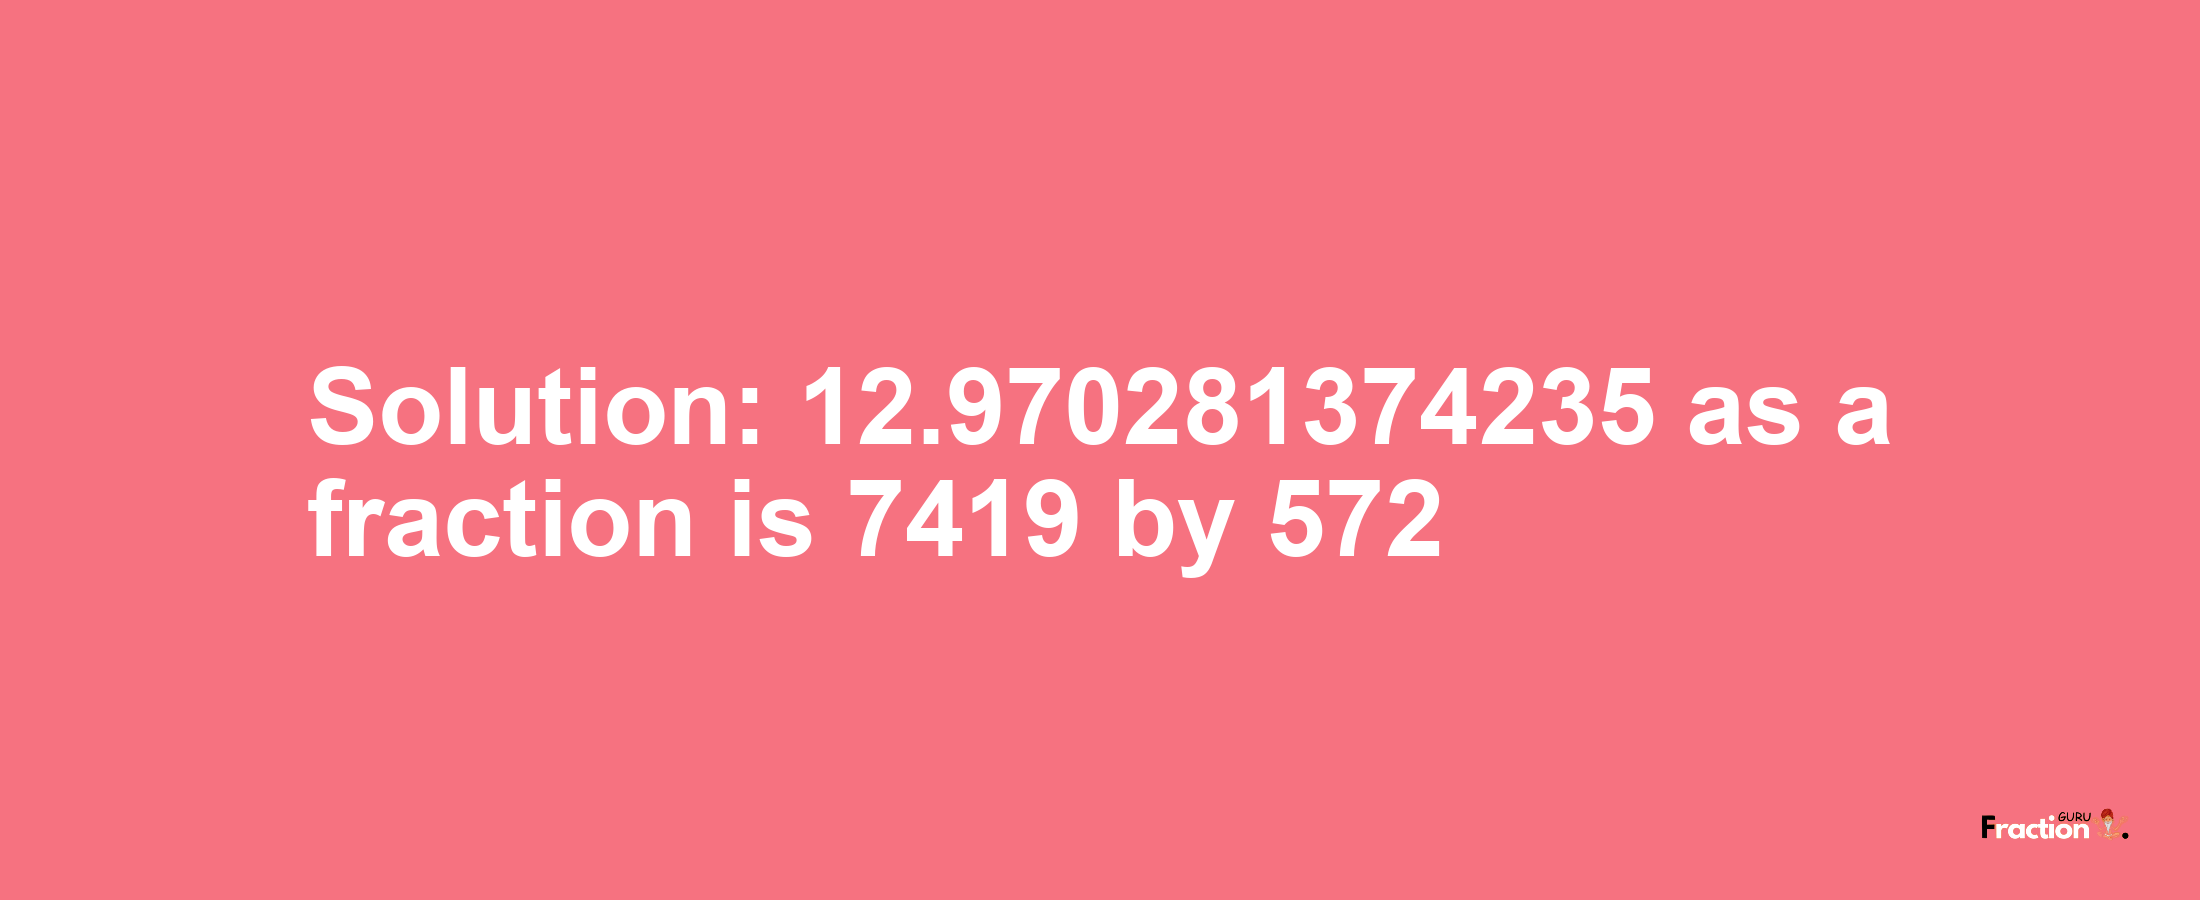 Solution:12.970281374235 as a fraction is 7419/572